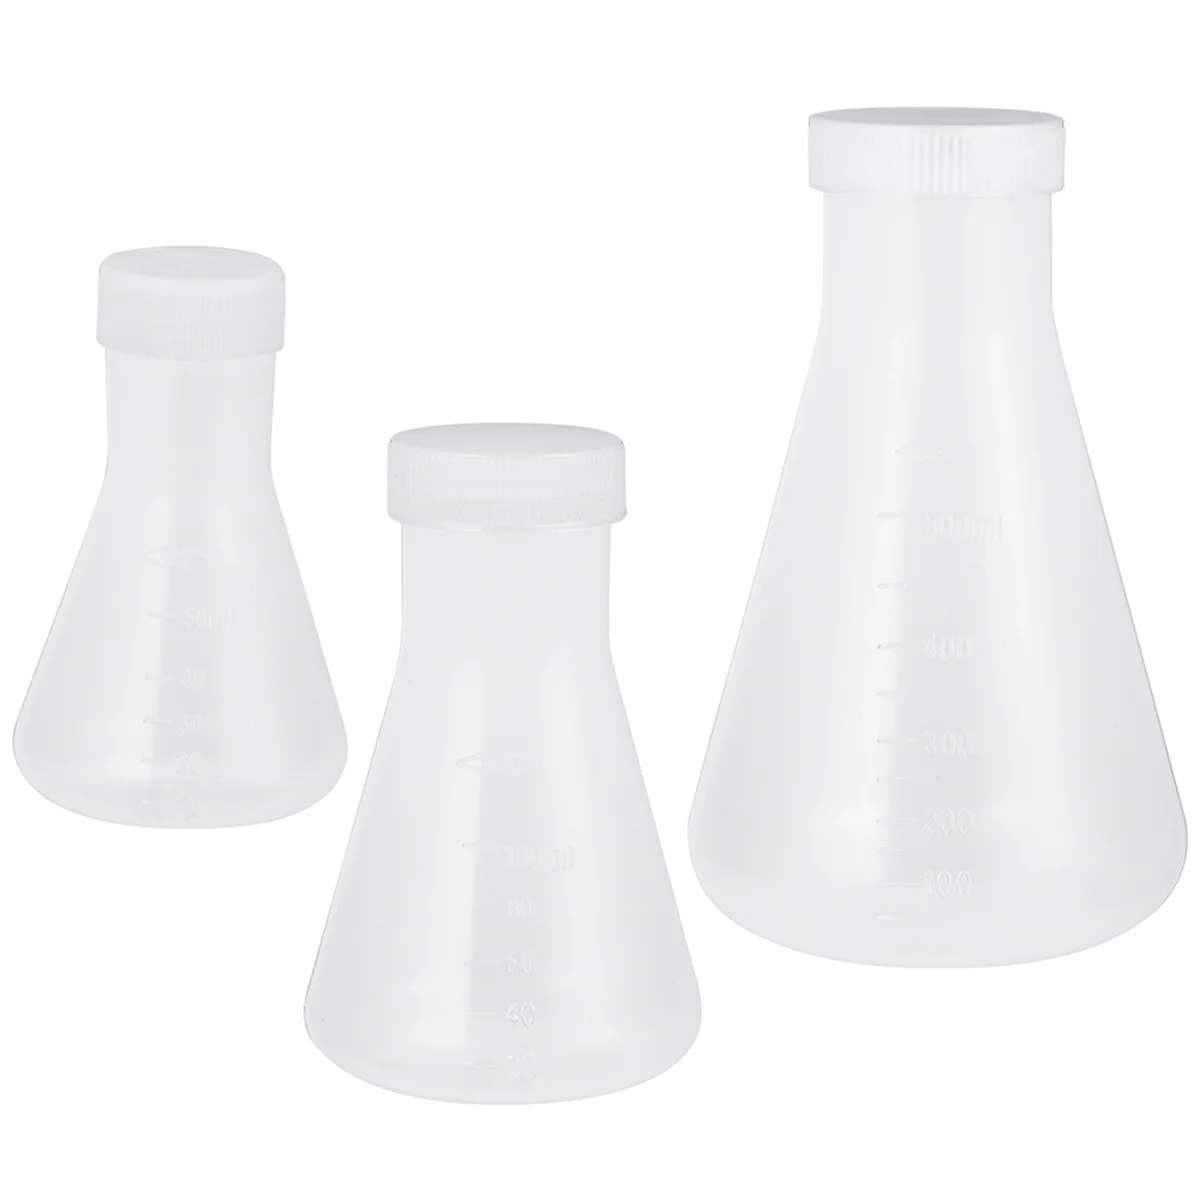 

Conical Flask 3Pcs Conical Flasks with Screw Caps Visible Measuring Cups for Laboratory Students Experiment Chemistry ( +